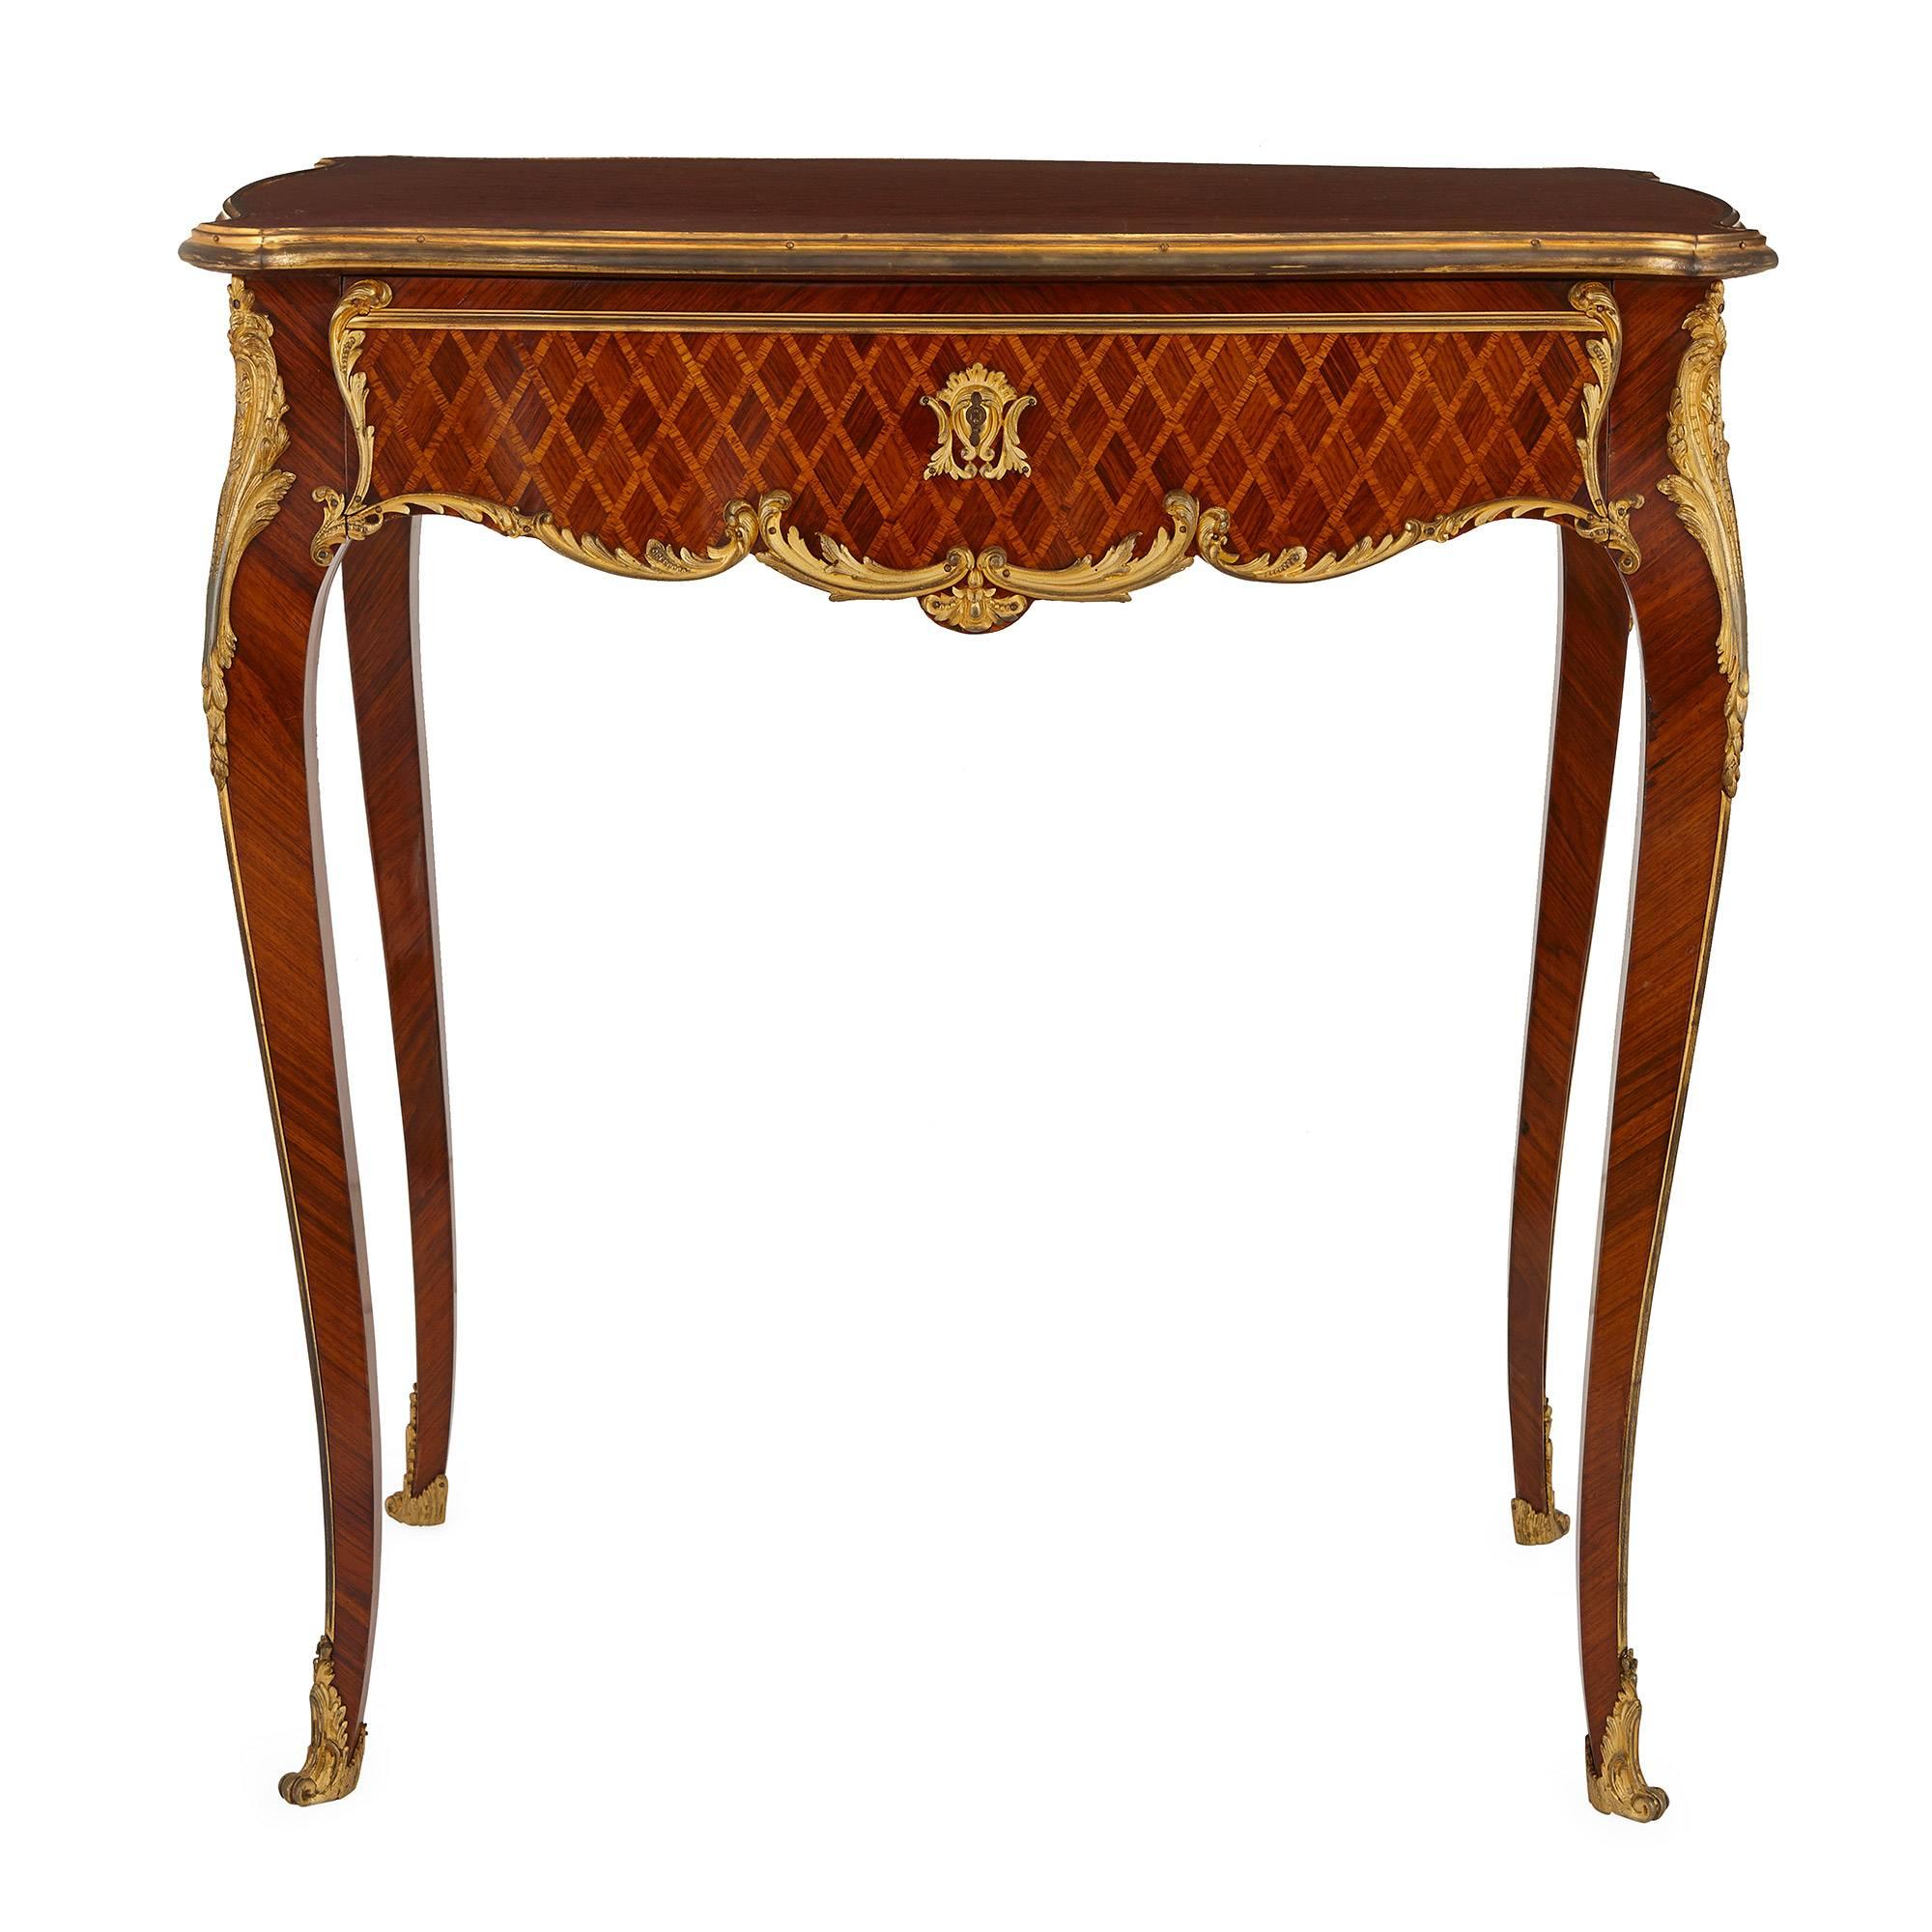 This late 19th century Louis XV style French side table features an intricate parquetry design in a diamond-shape pattern. The top and skirting of the table both feature this design and are bordered with scrolling acanthus leaf gilt bronze mounts